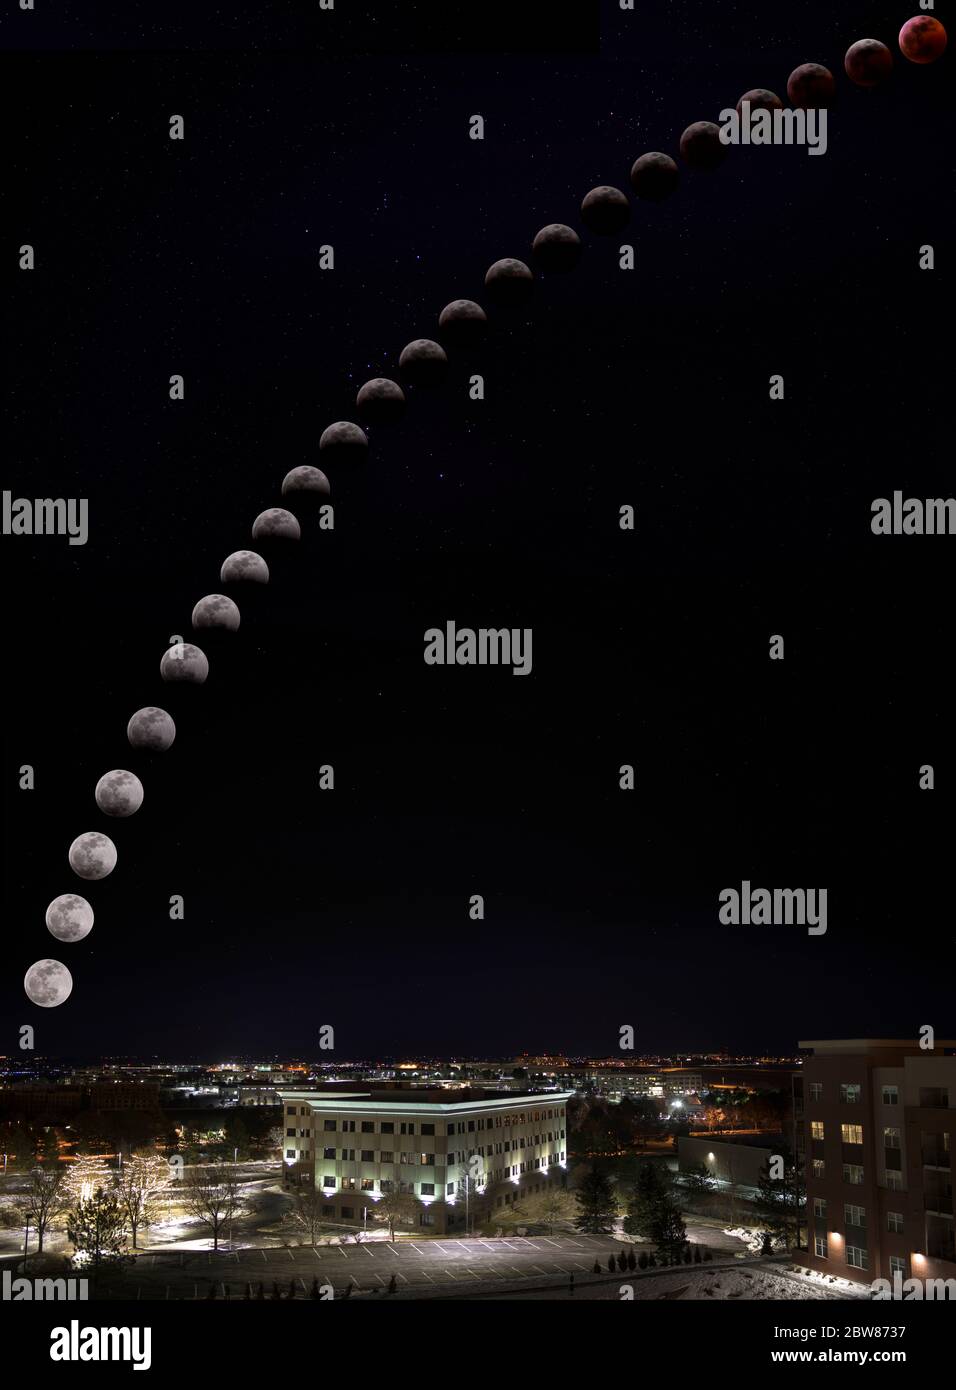 January 2019 Lunar Eclipse Image Composite of Eclipse with Stars, Moon, and Buildings near Denver, Colorado Stock Photo